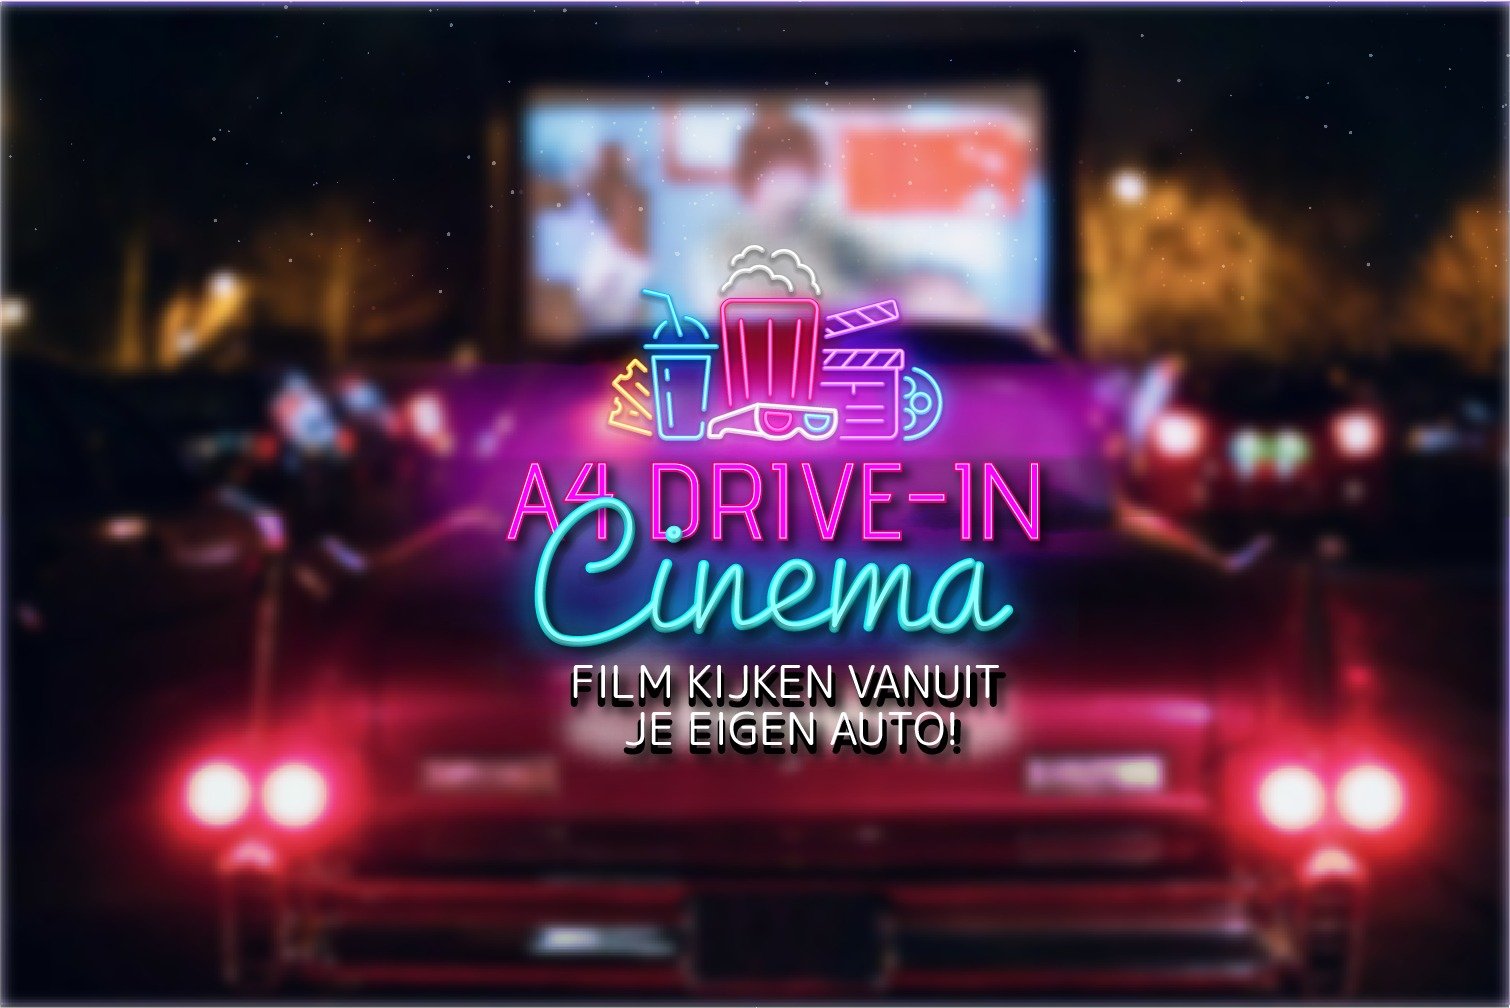 Drive-in bioscoop: Grease